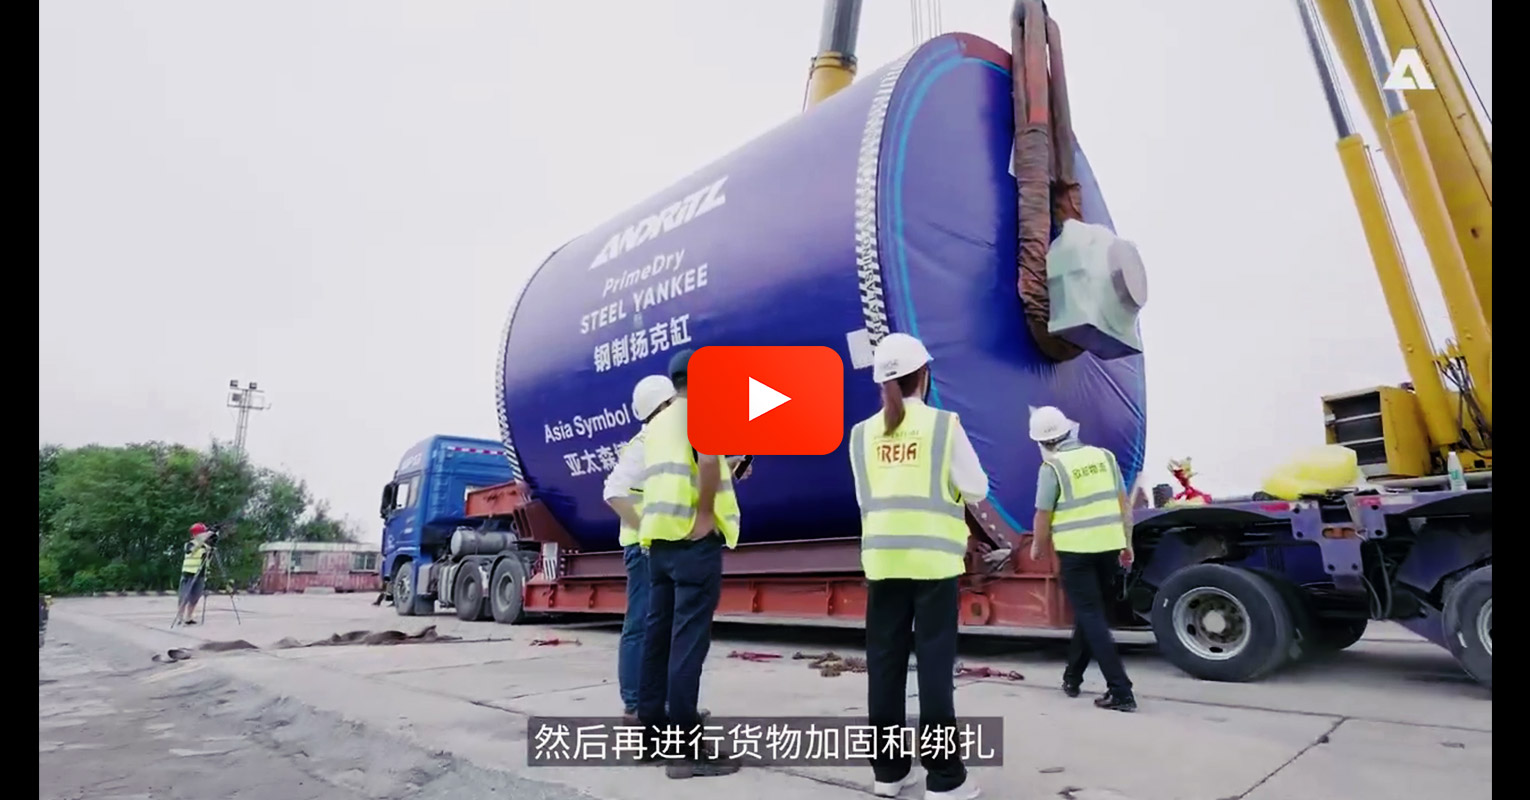 Freja China Participated in Andrits Successful Delivery of the 137mt Yankee Cylinder